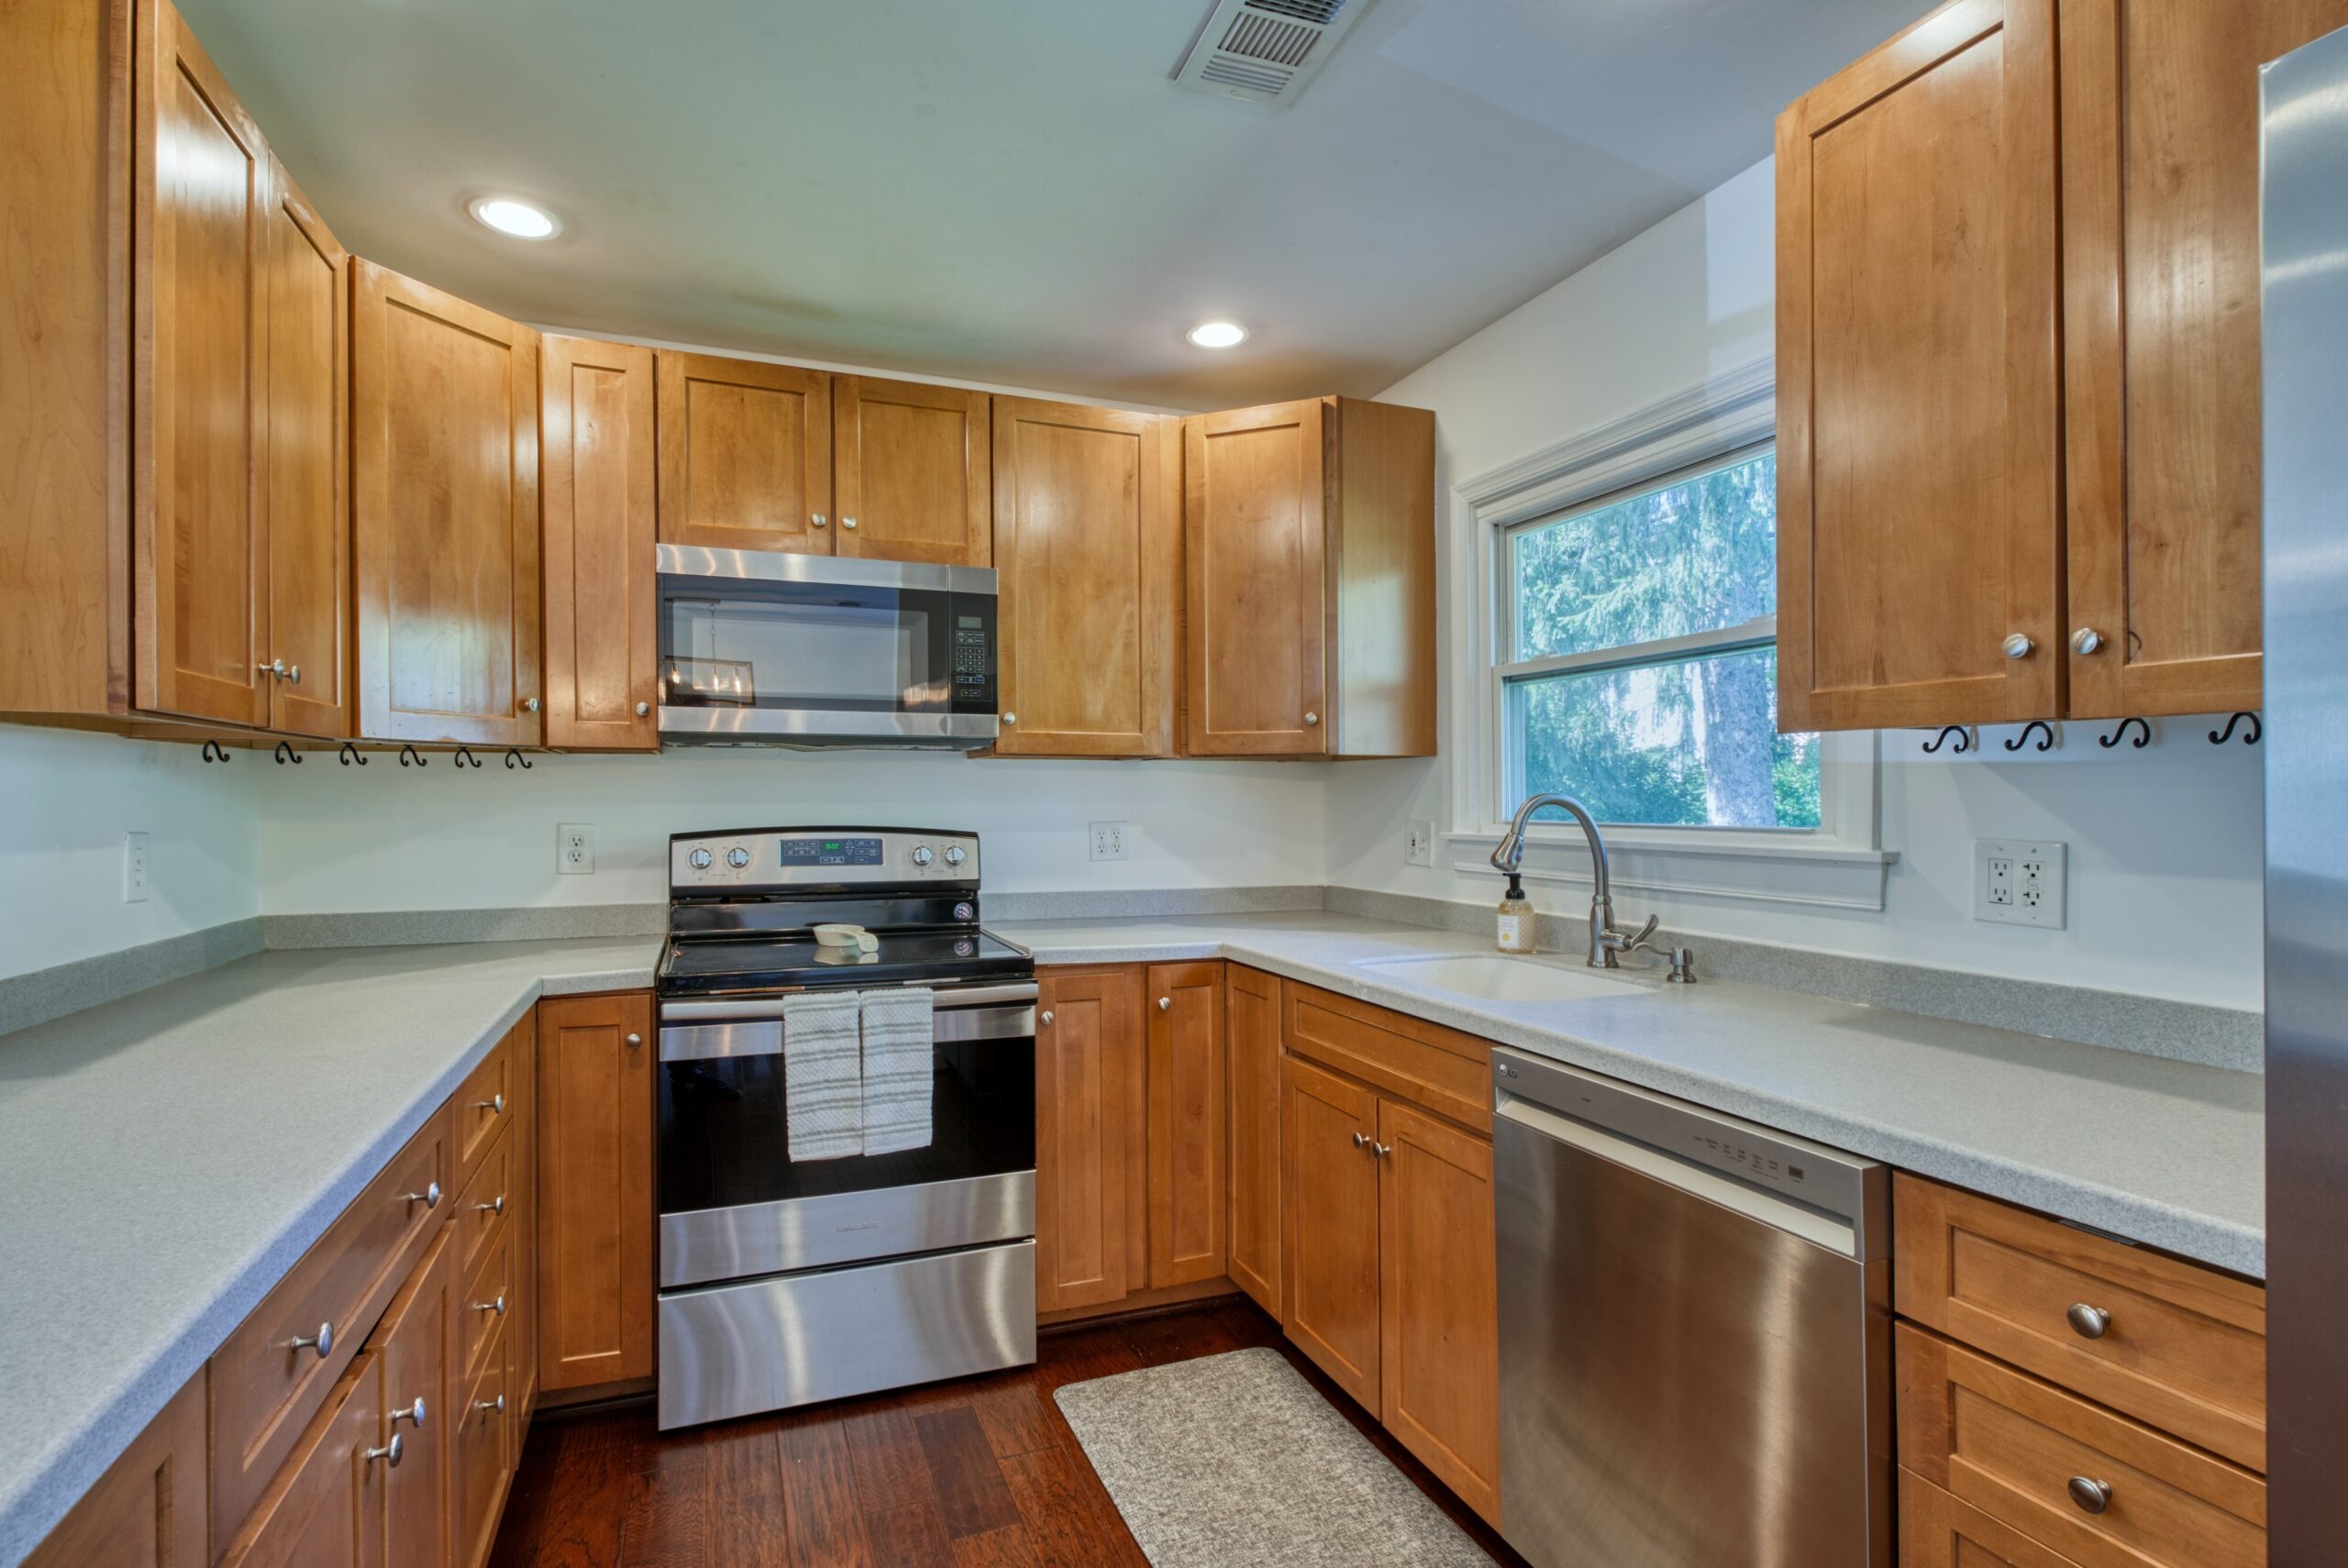 Professional interior photo of 1103 S Greenthorn Ave in Sterling, VA - showing the u-shaped kitchen with abundant counterspace and walnut cabinets